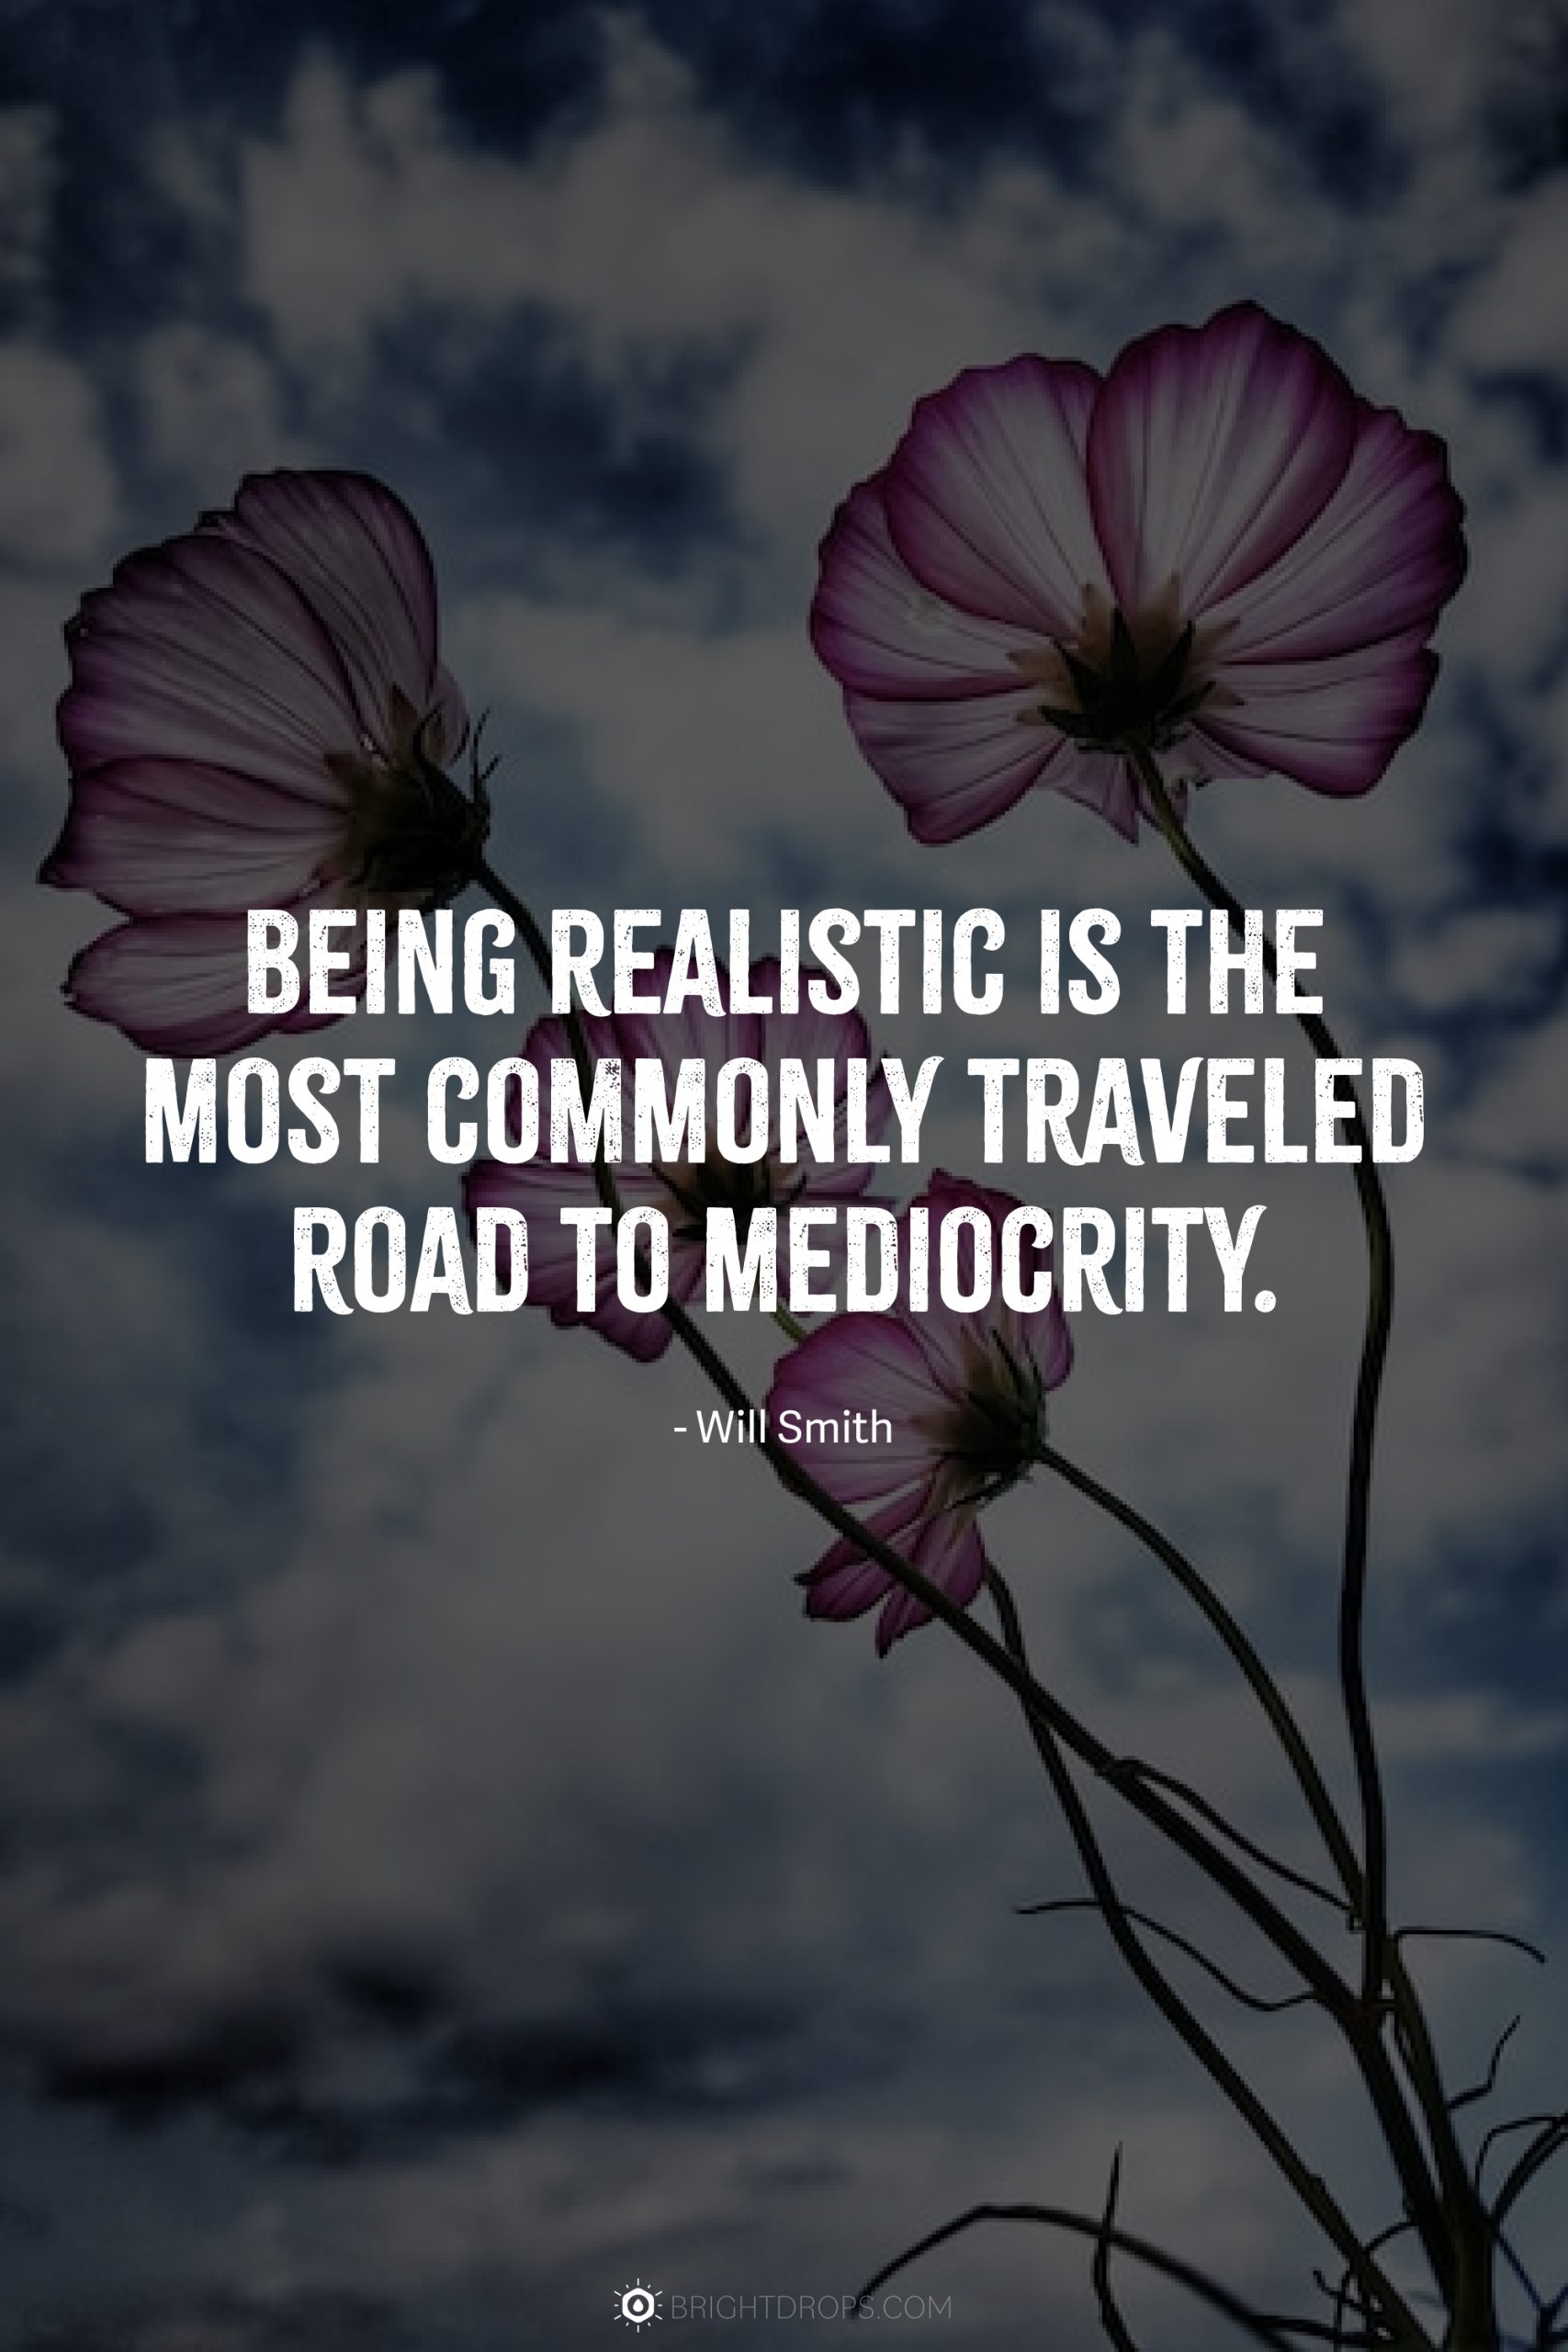 Being realistic is the most commonly traveled road to mediocrity.